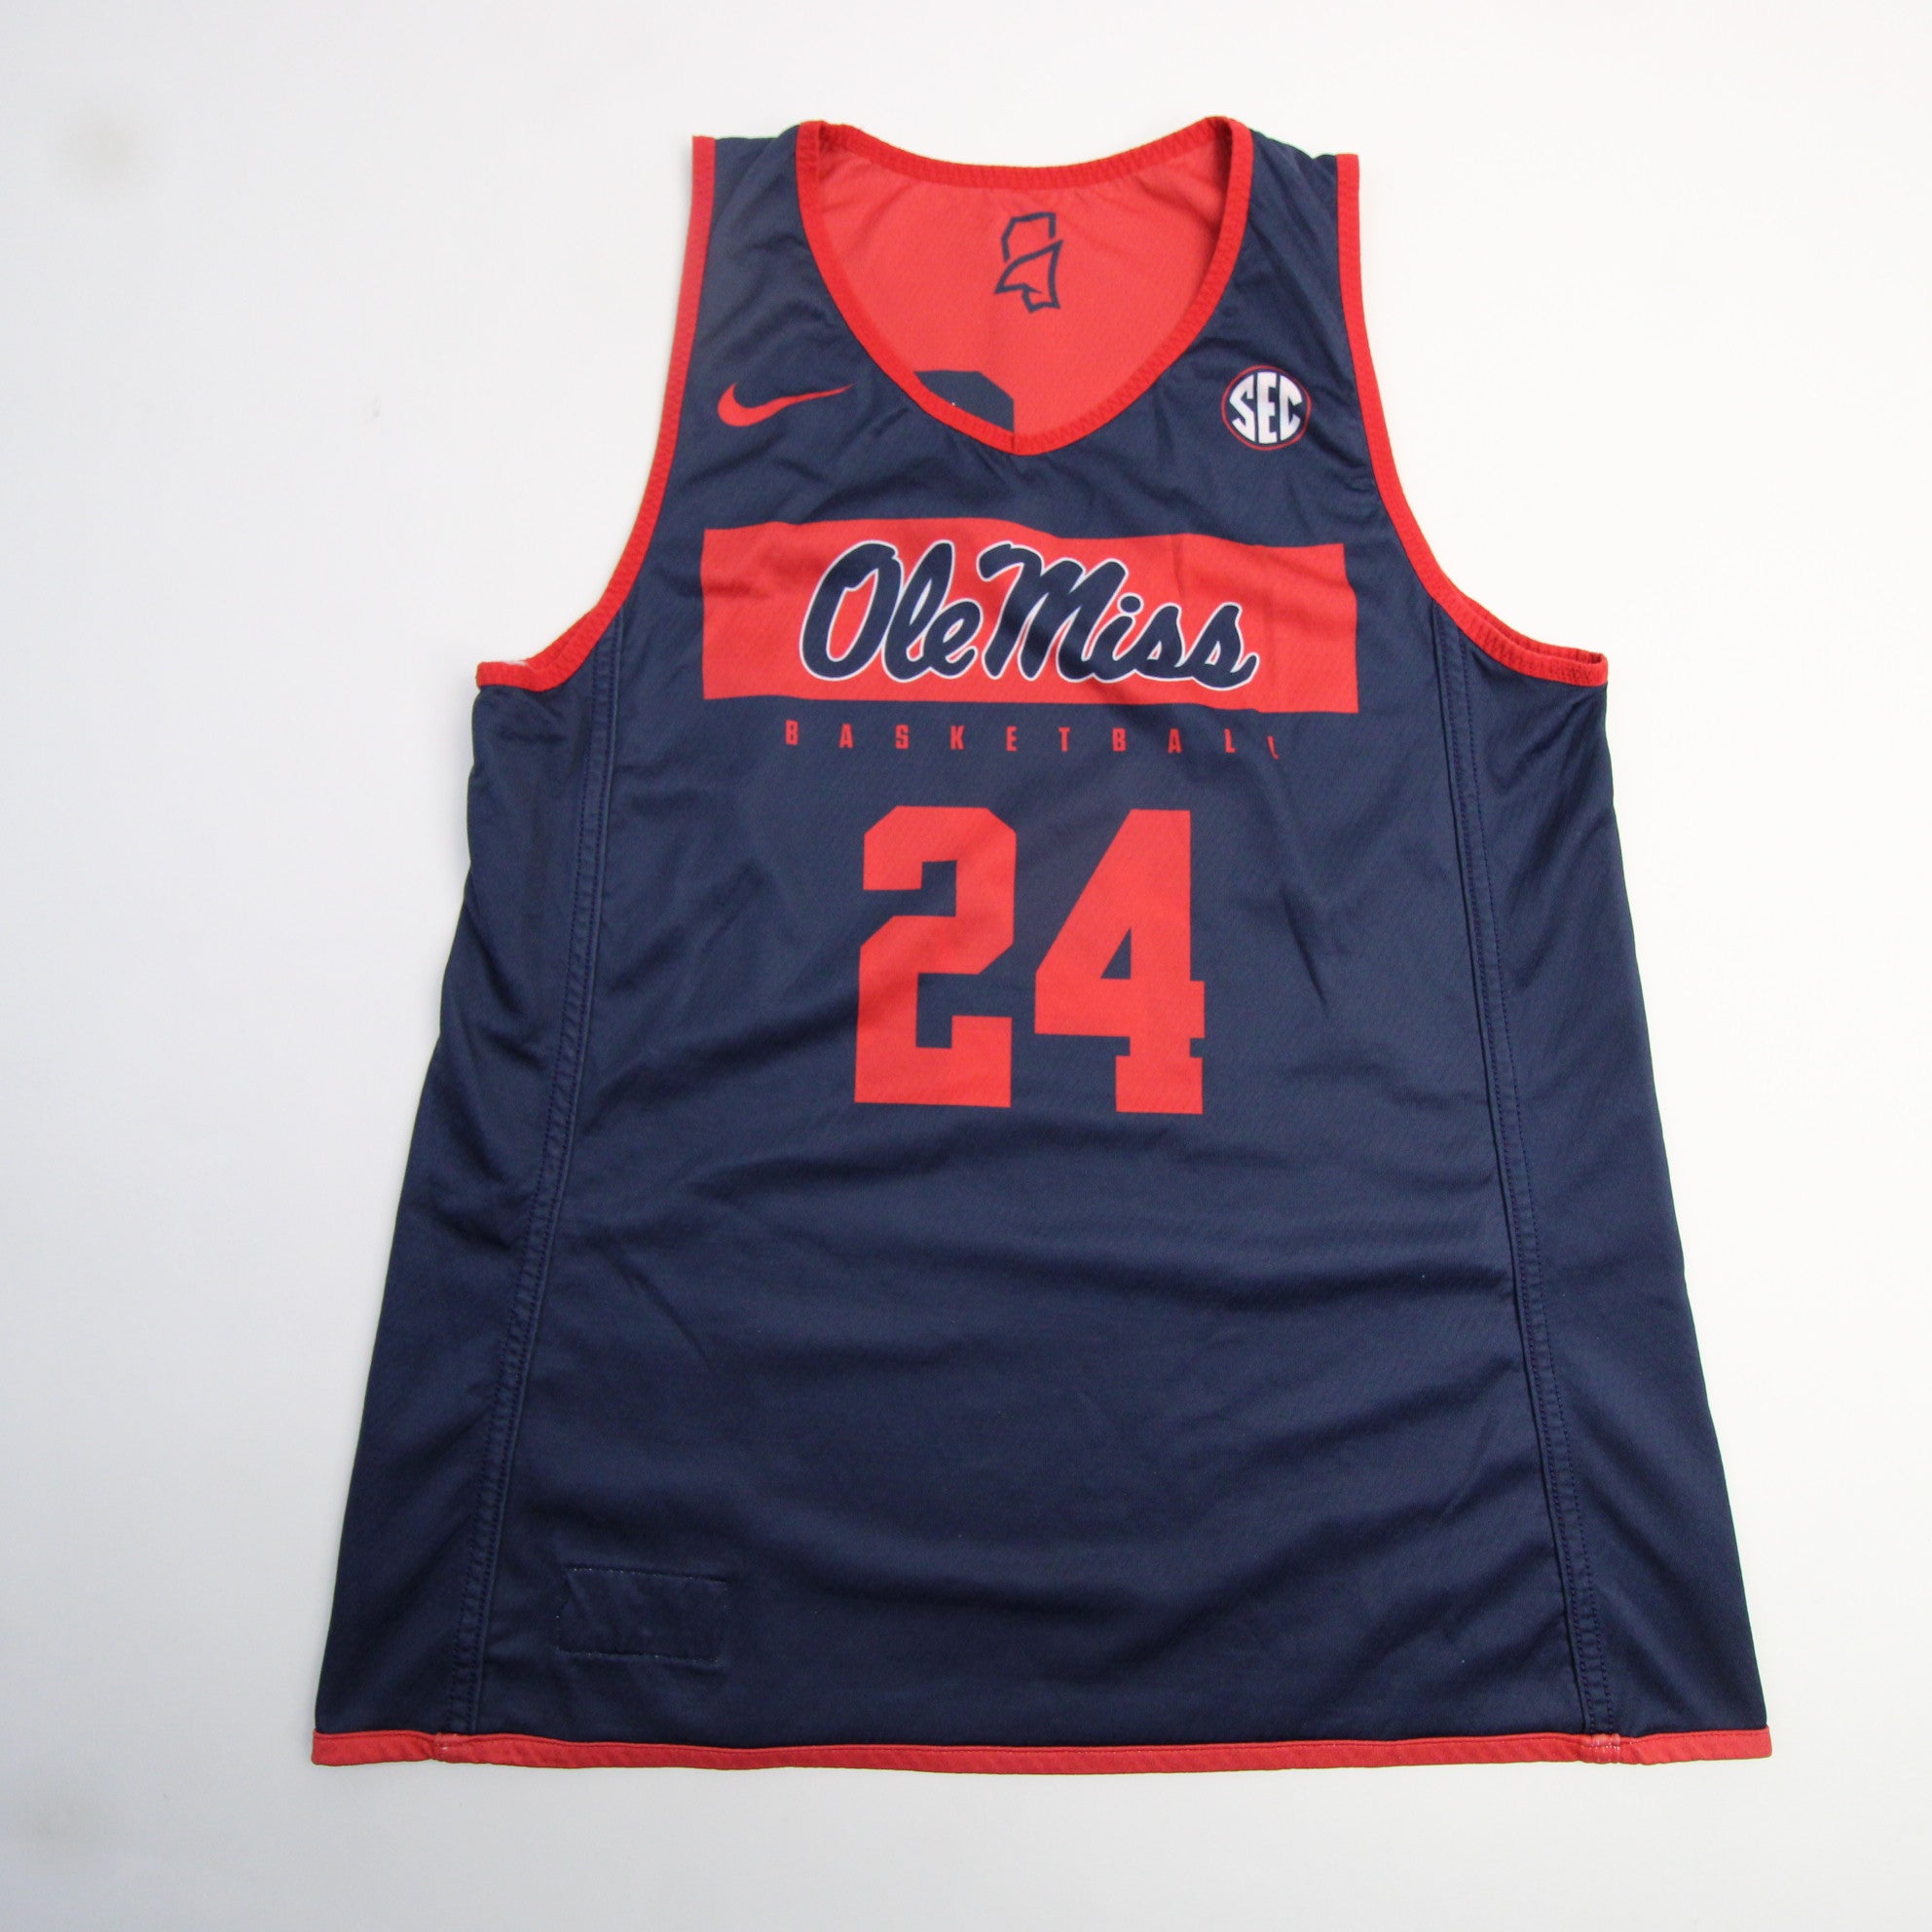 Ole Miss Rebels Nike Game Jersey - Basketball Men's Cream/Red Used